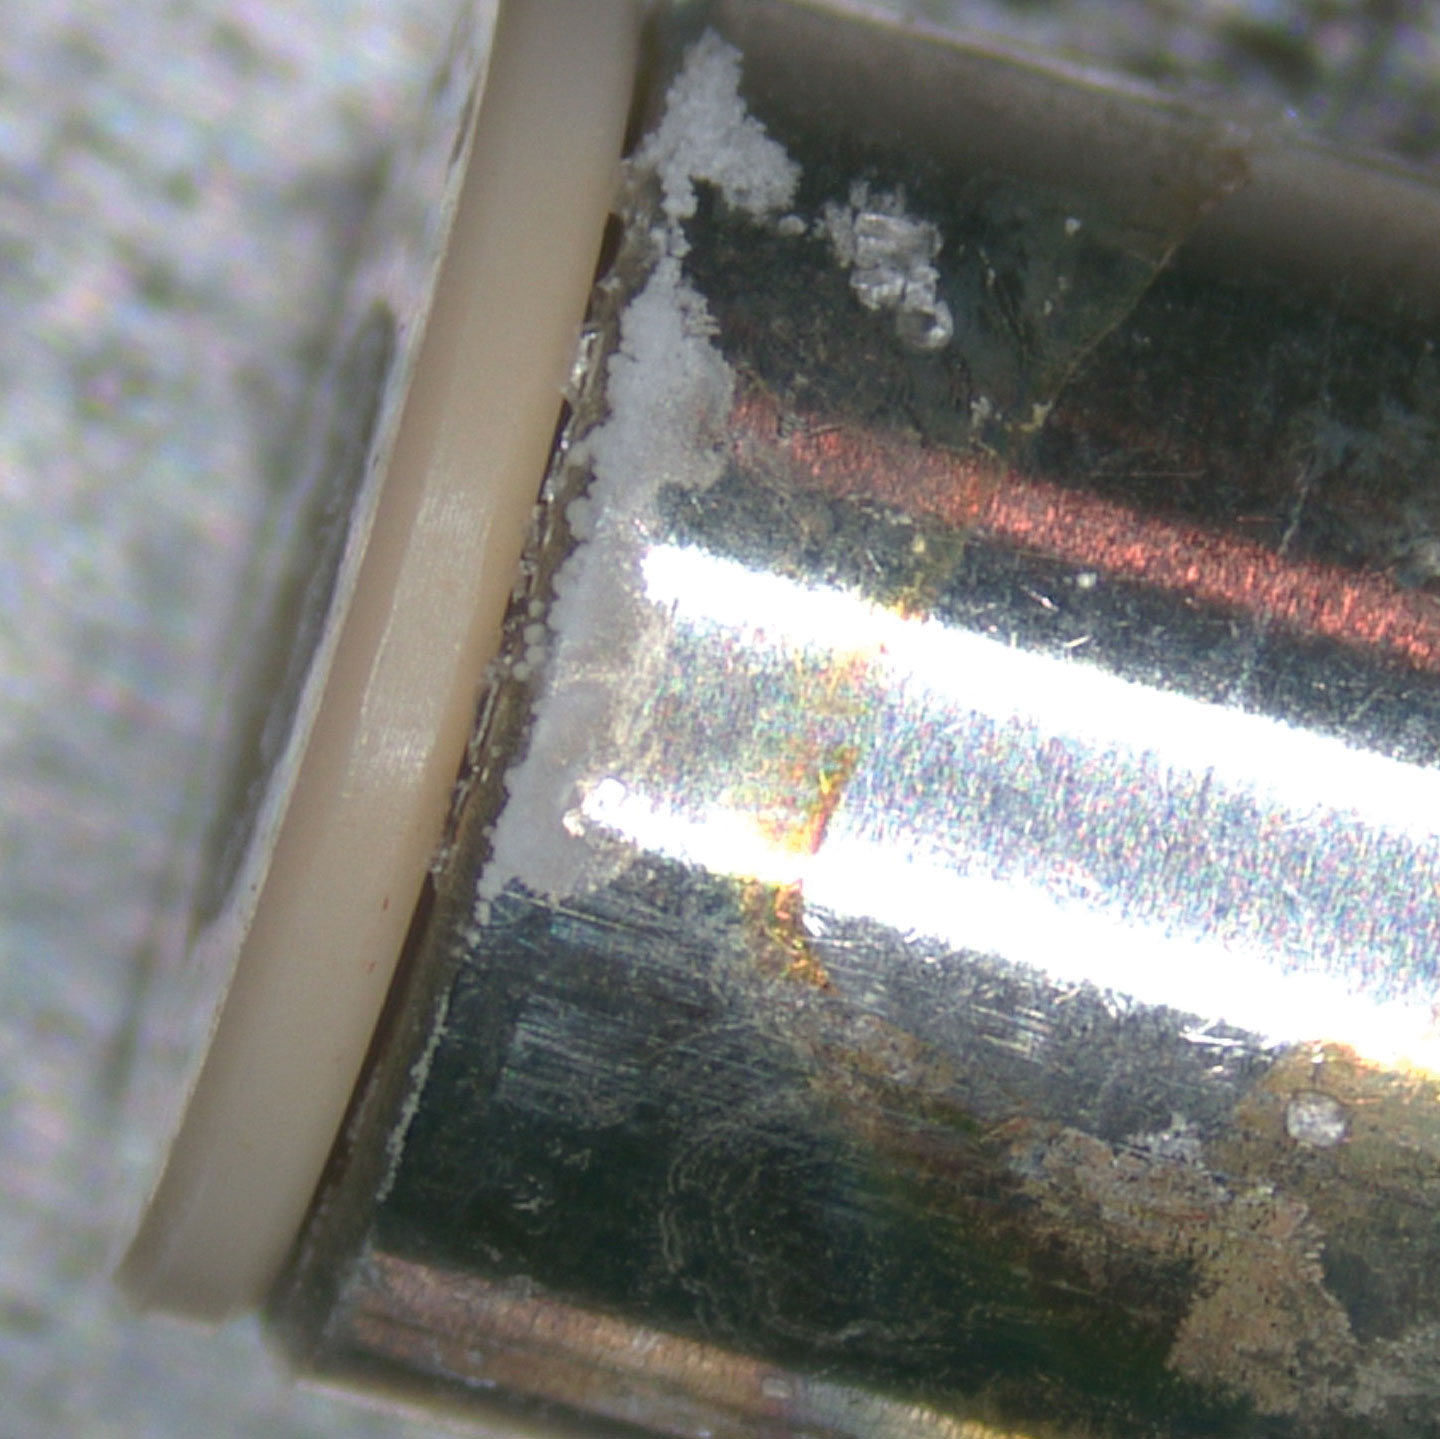 salt crystallization on cartridge when the cartridge dries out after use of a mobile phase